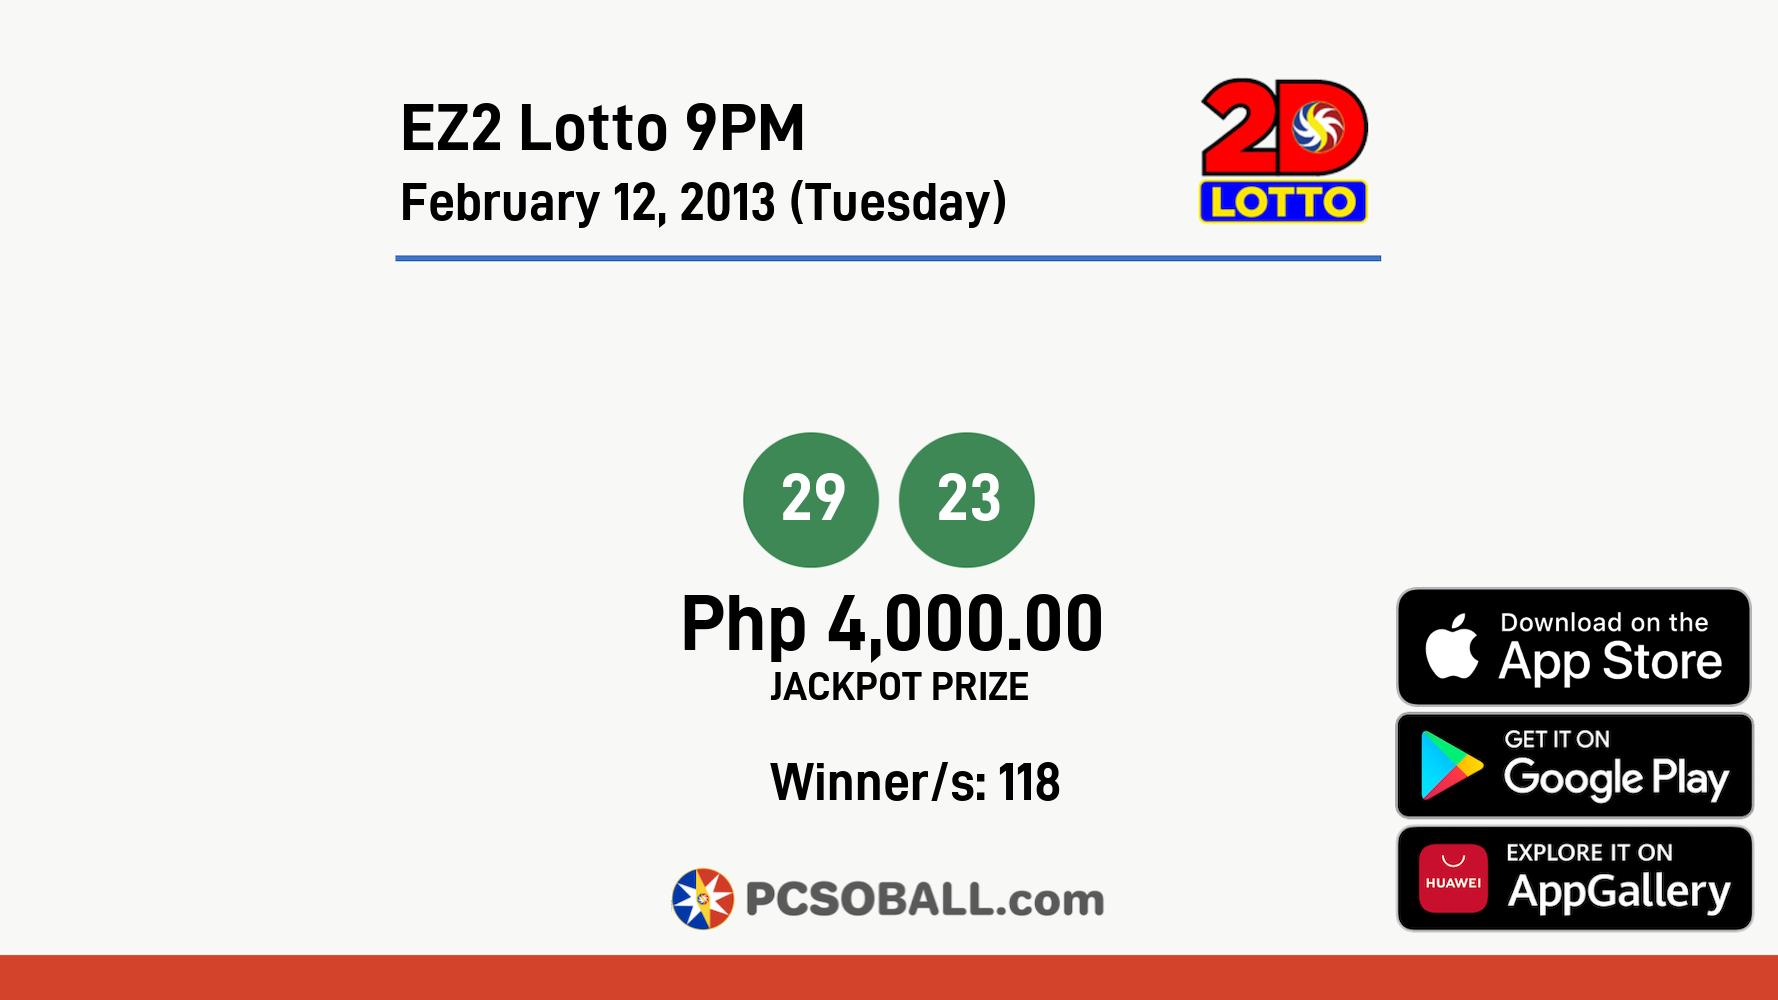 EZ2 Lotto 9PM February 12, 2013 (Tuesday) Result